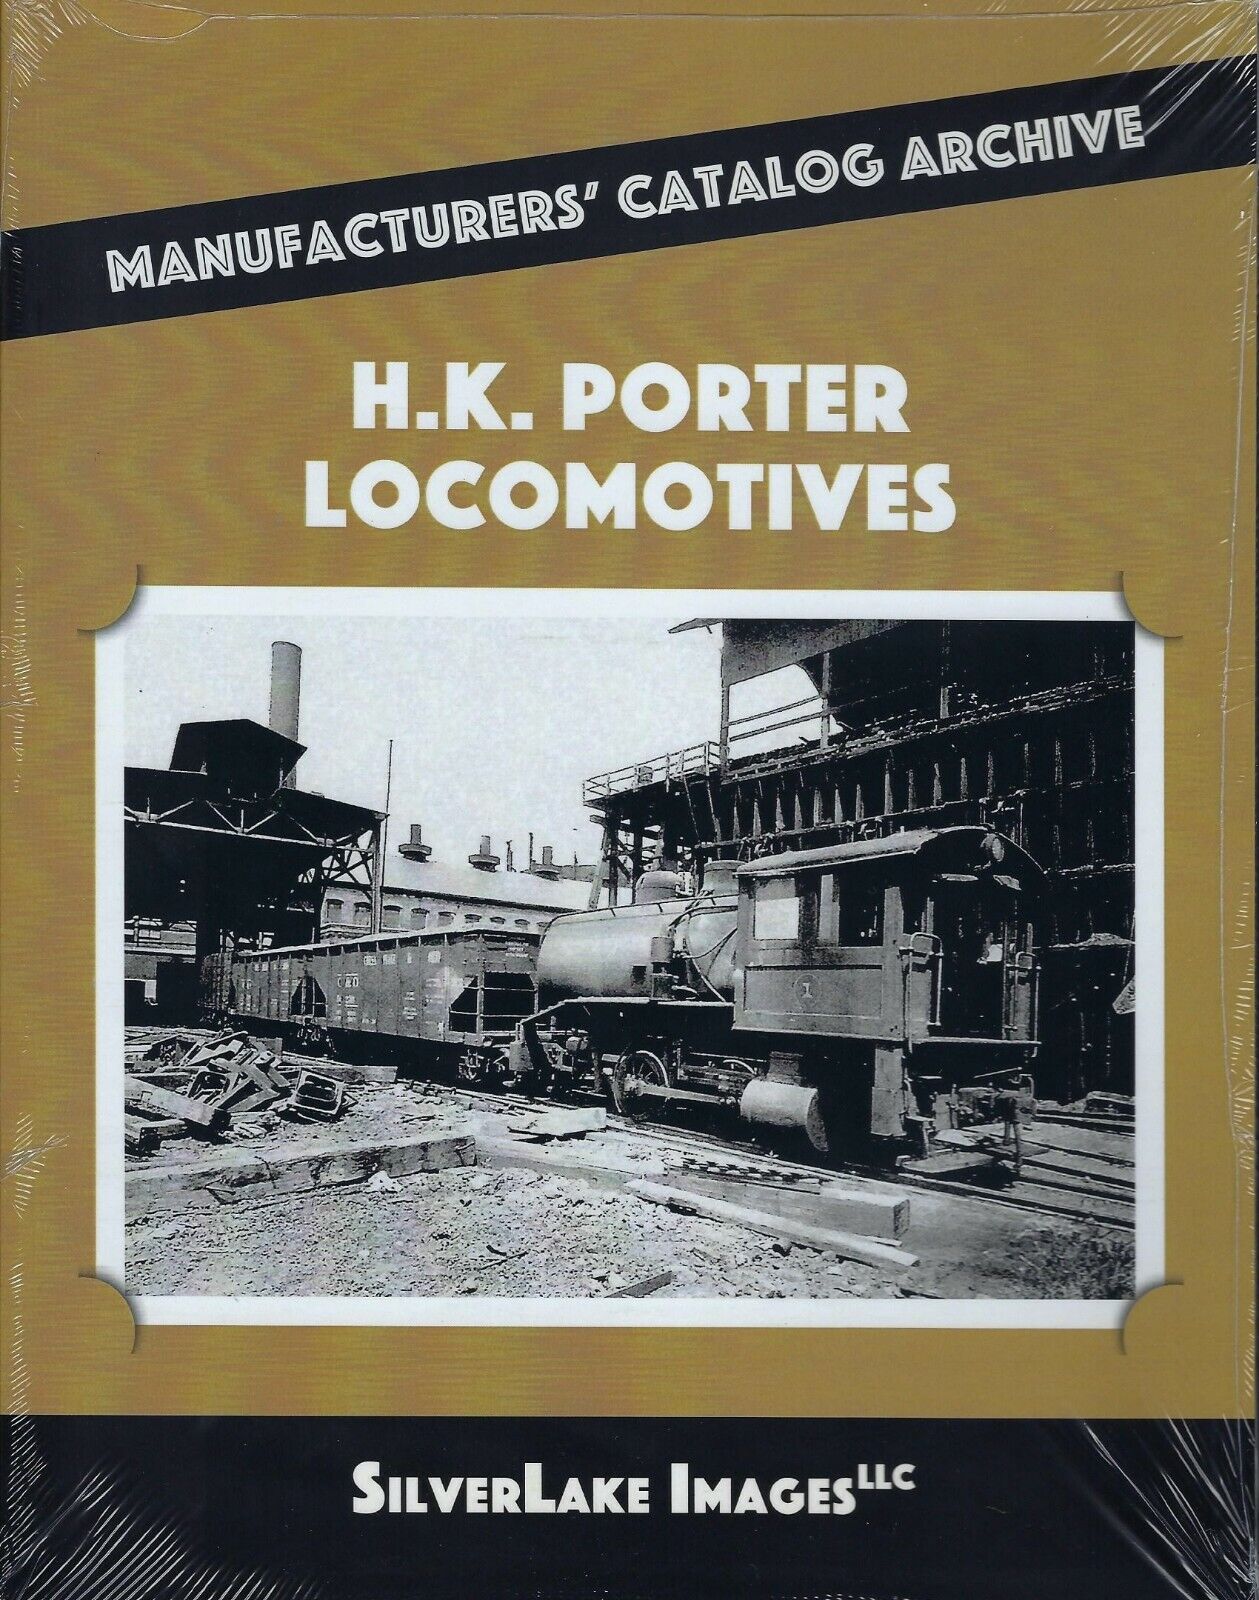 H.K. PORTER LOCOMOTIVES from Manufacturers' Catalog, Out of Print BRAND NEW BOOK